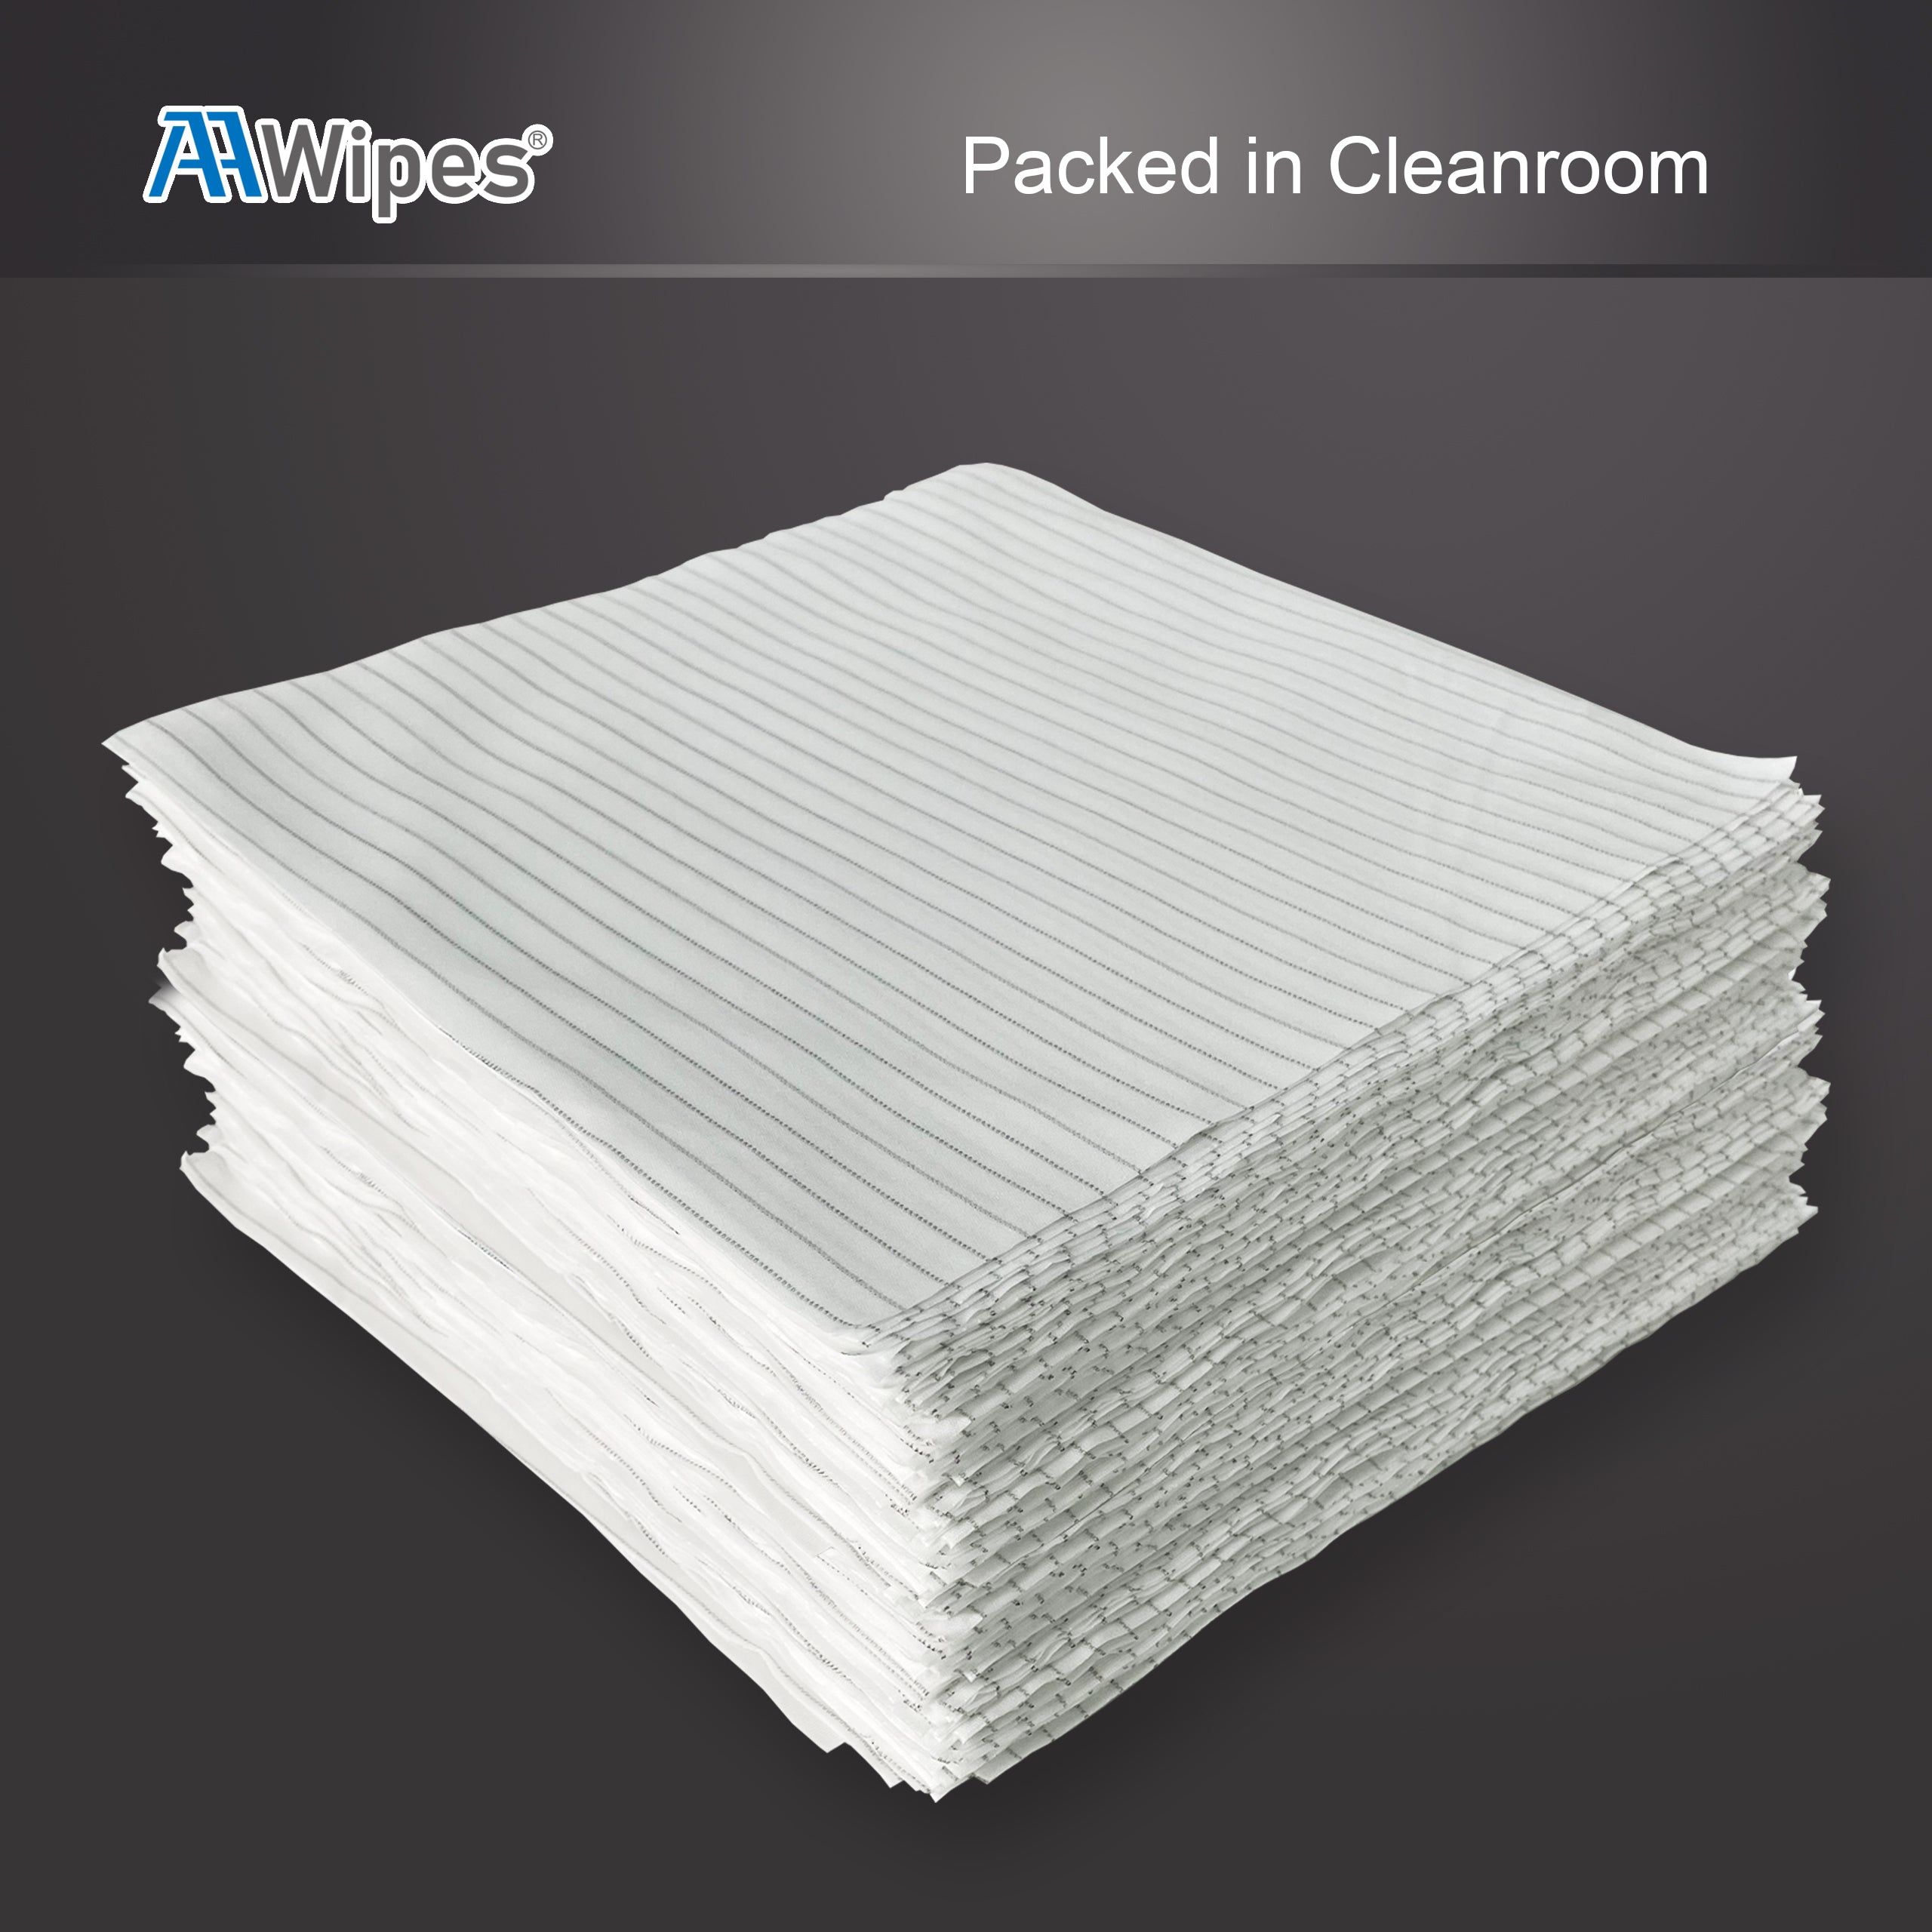 ESD-Safer Cleanroom Wipers, Lint Free, Sealed Laser Cut Edges Suit Class 100  6"x6" for Clean Workshop Optical Lens Wiping (Starting from 4,000 Wipes/40 Bags/1 Box) (No. CE16006)